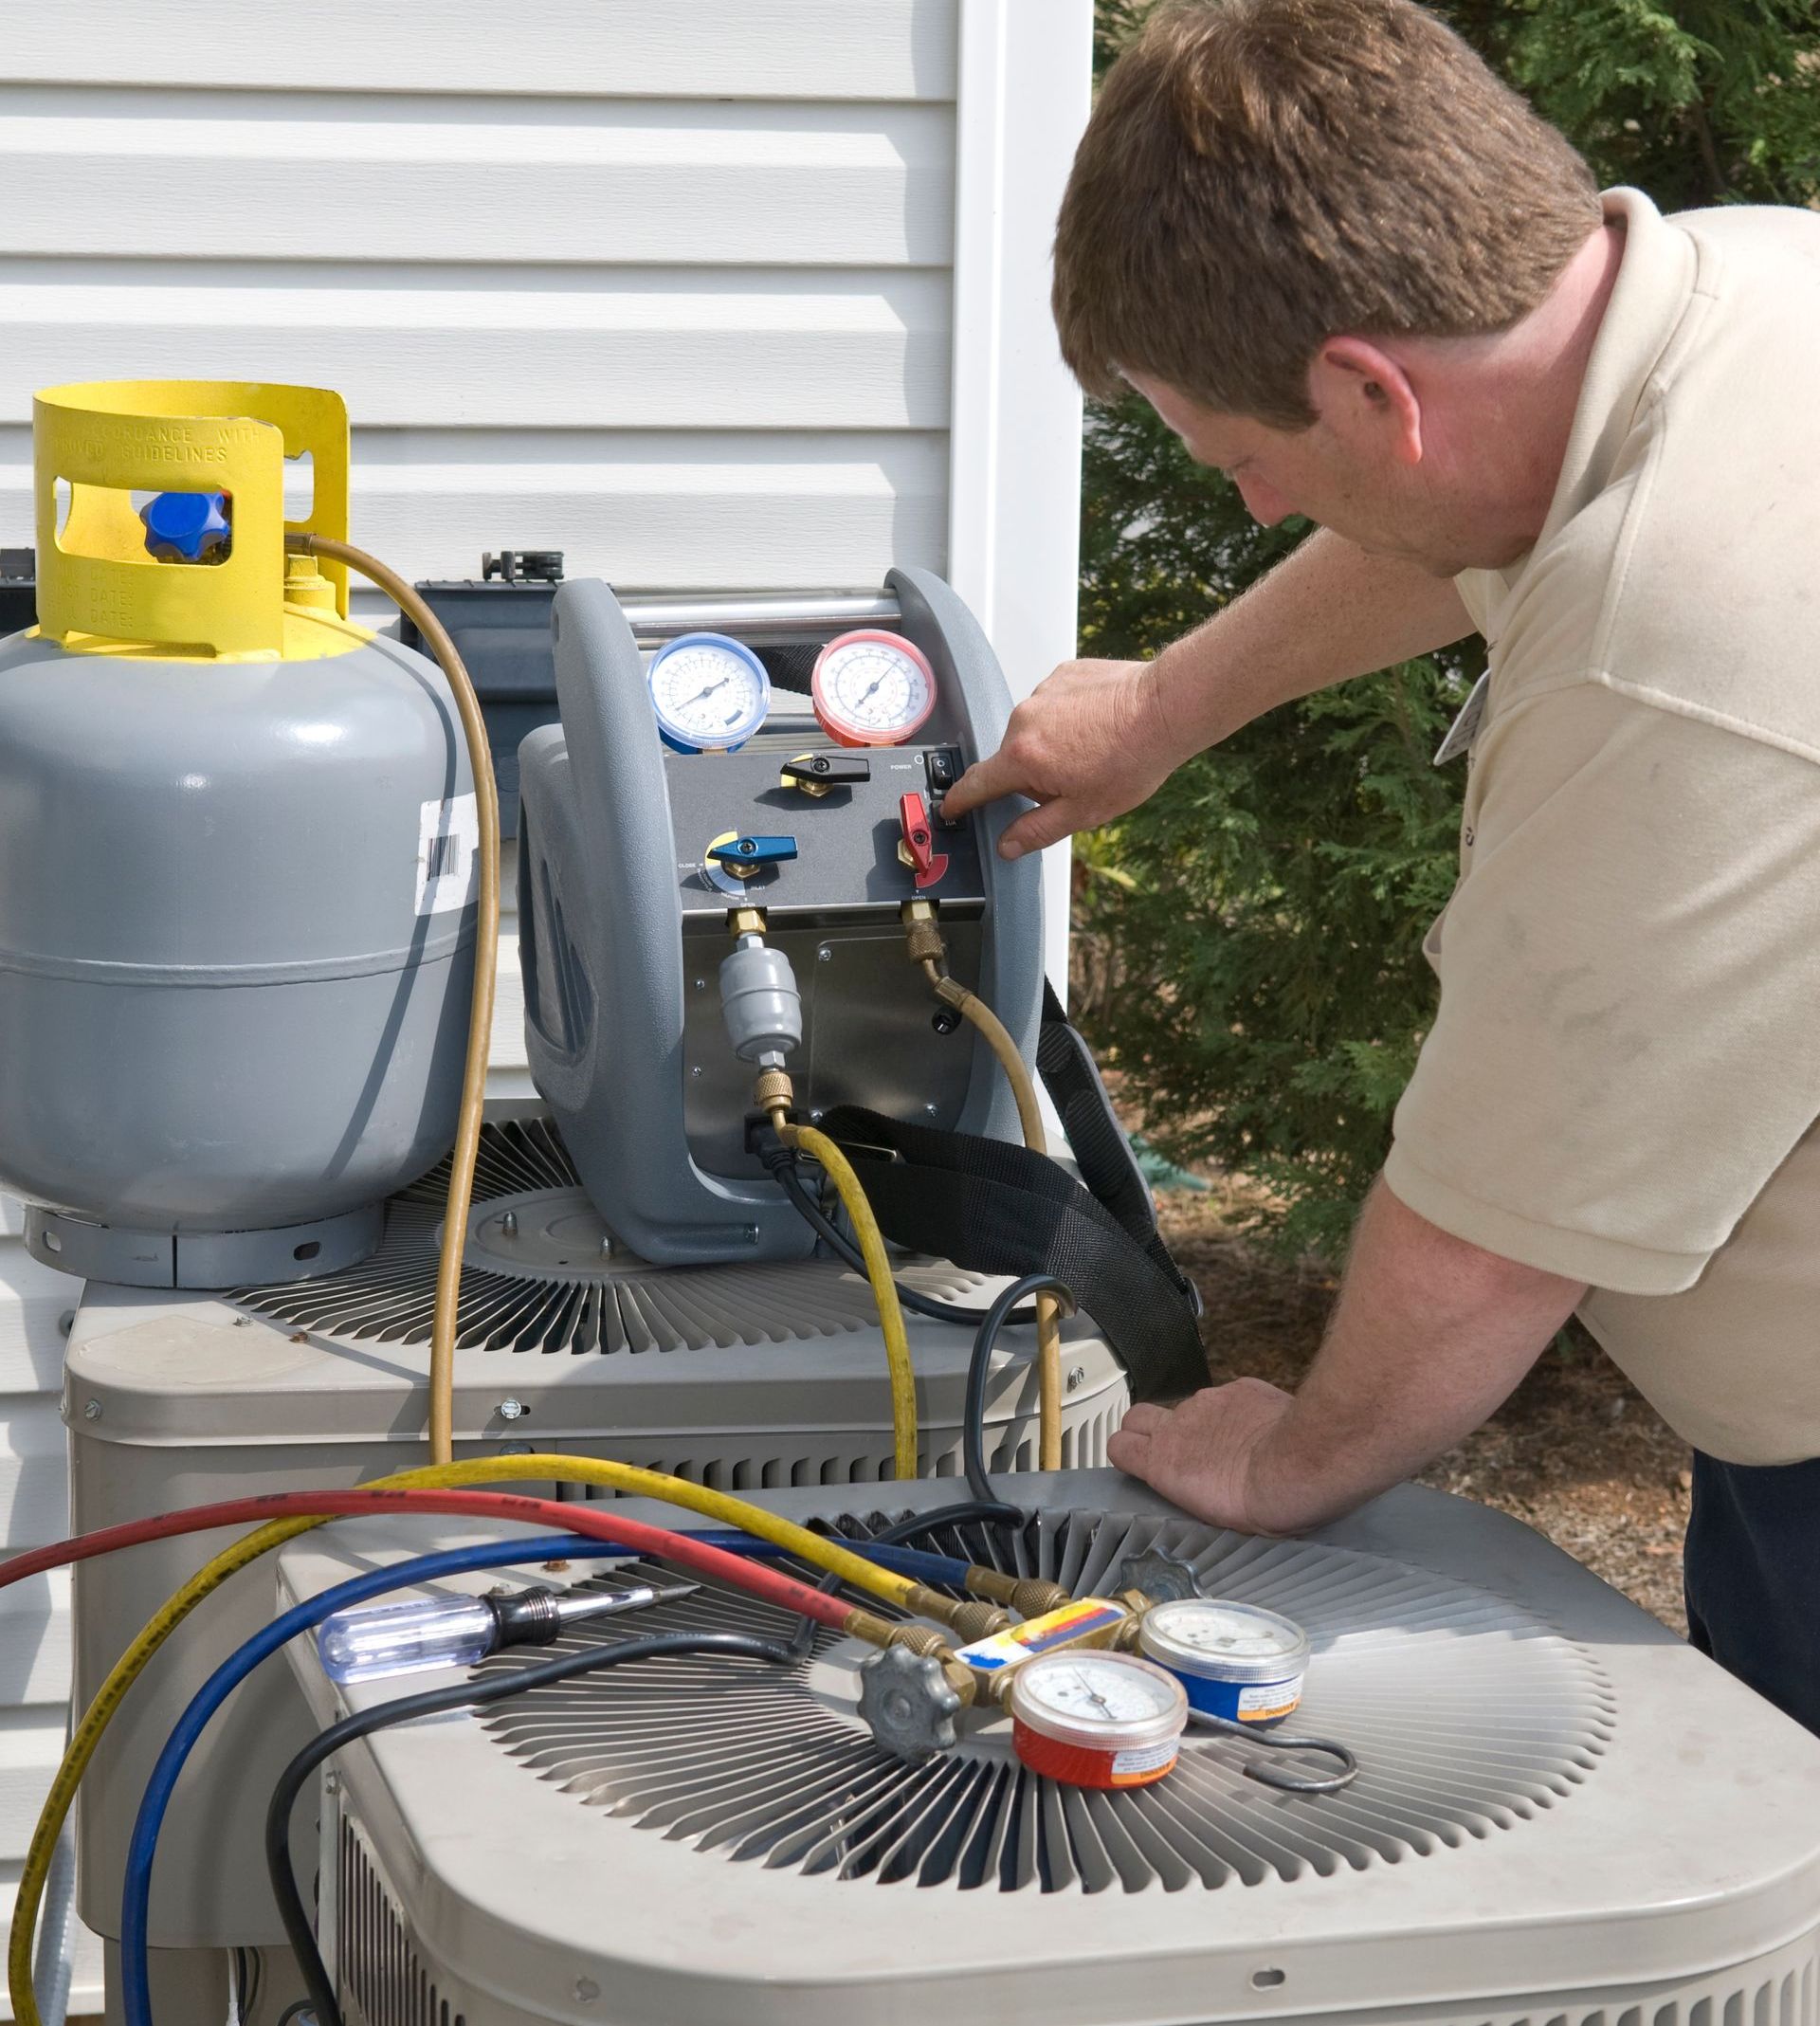 A professional AC repairman charges a residential central air conditioner unit with refrigerant (Freon) to restore proper cooling functionality.